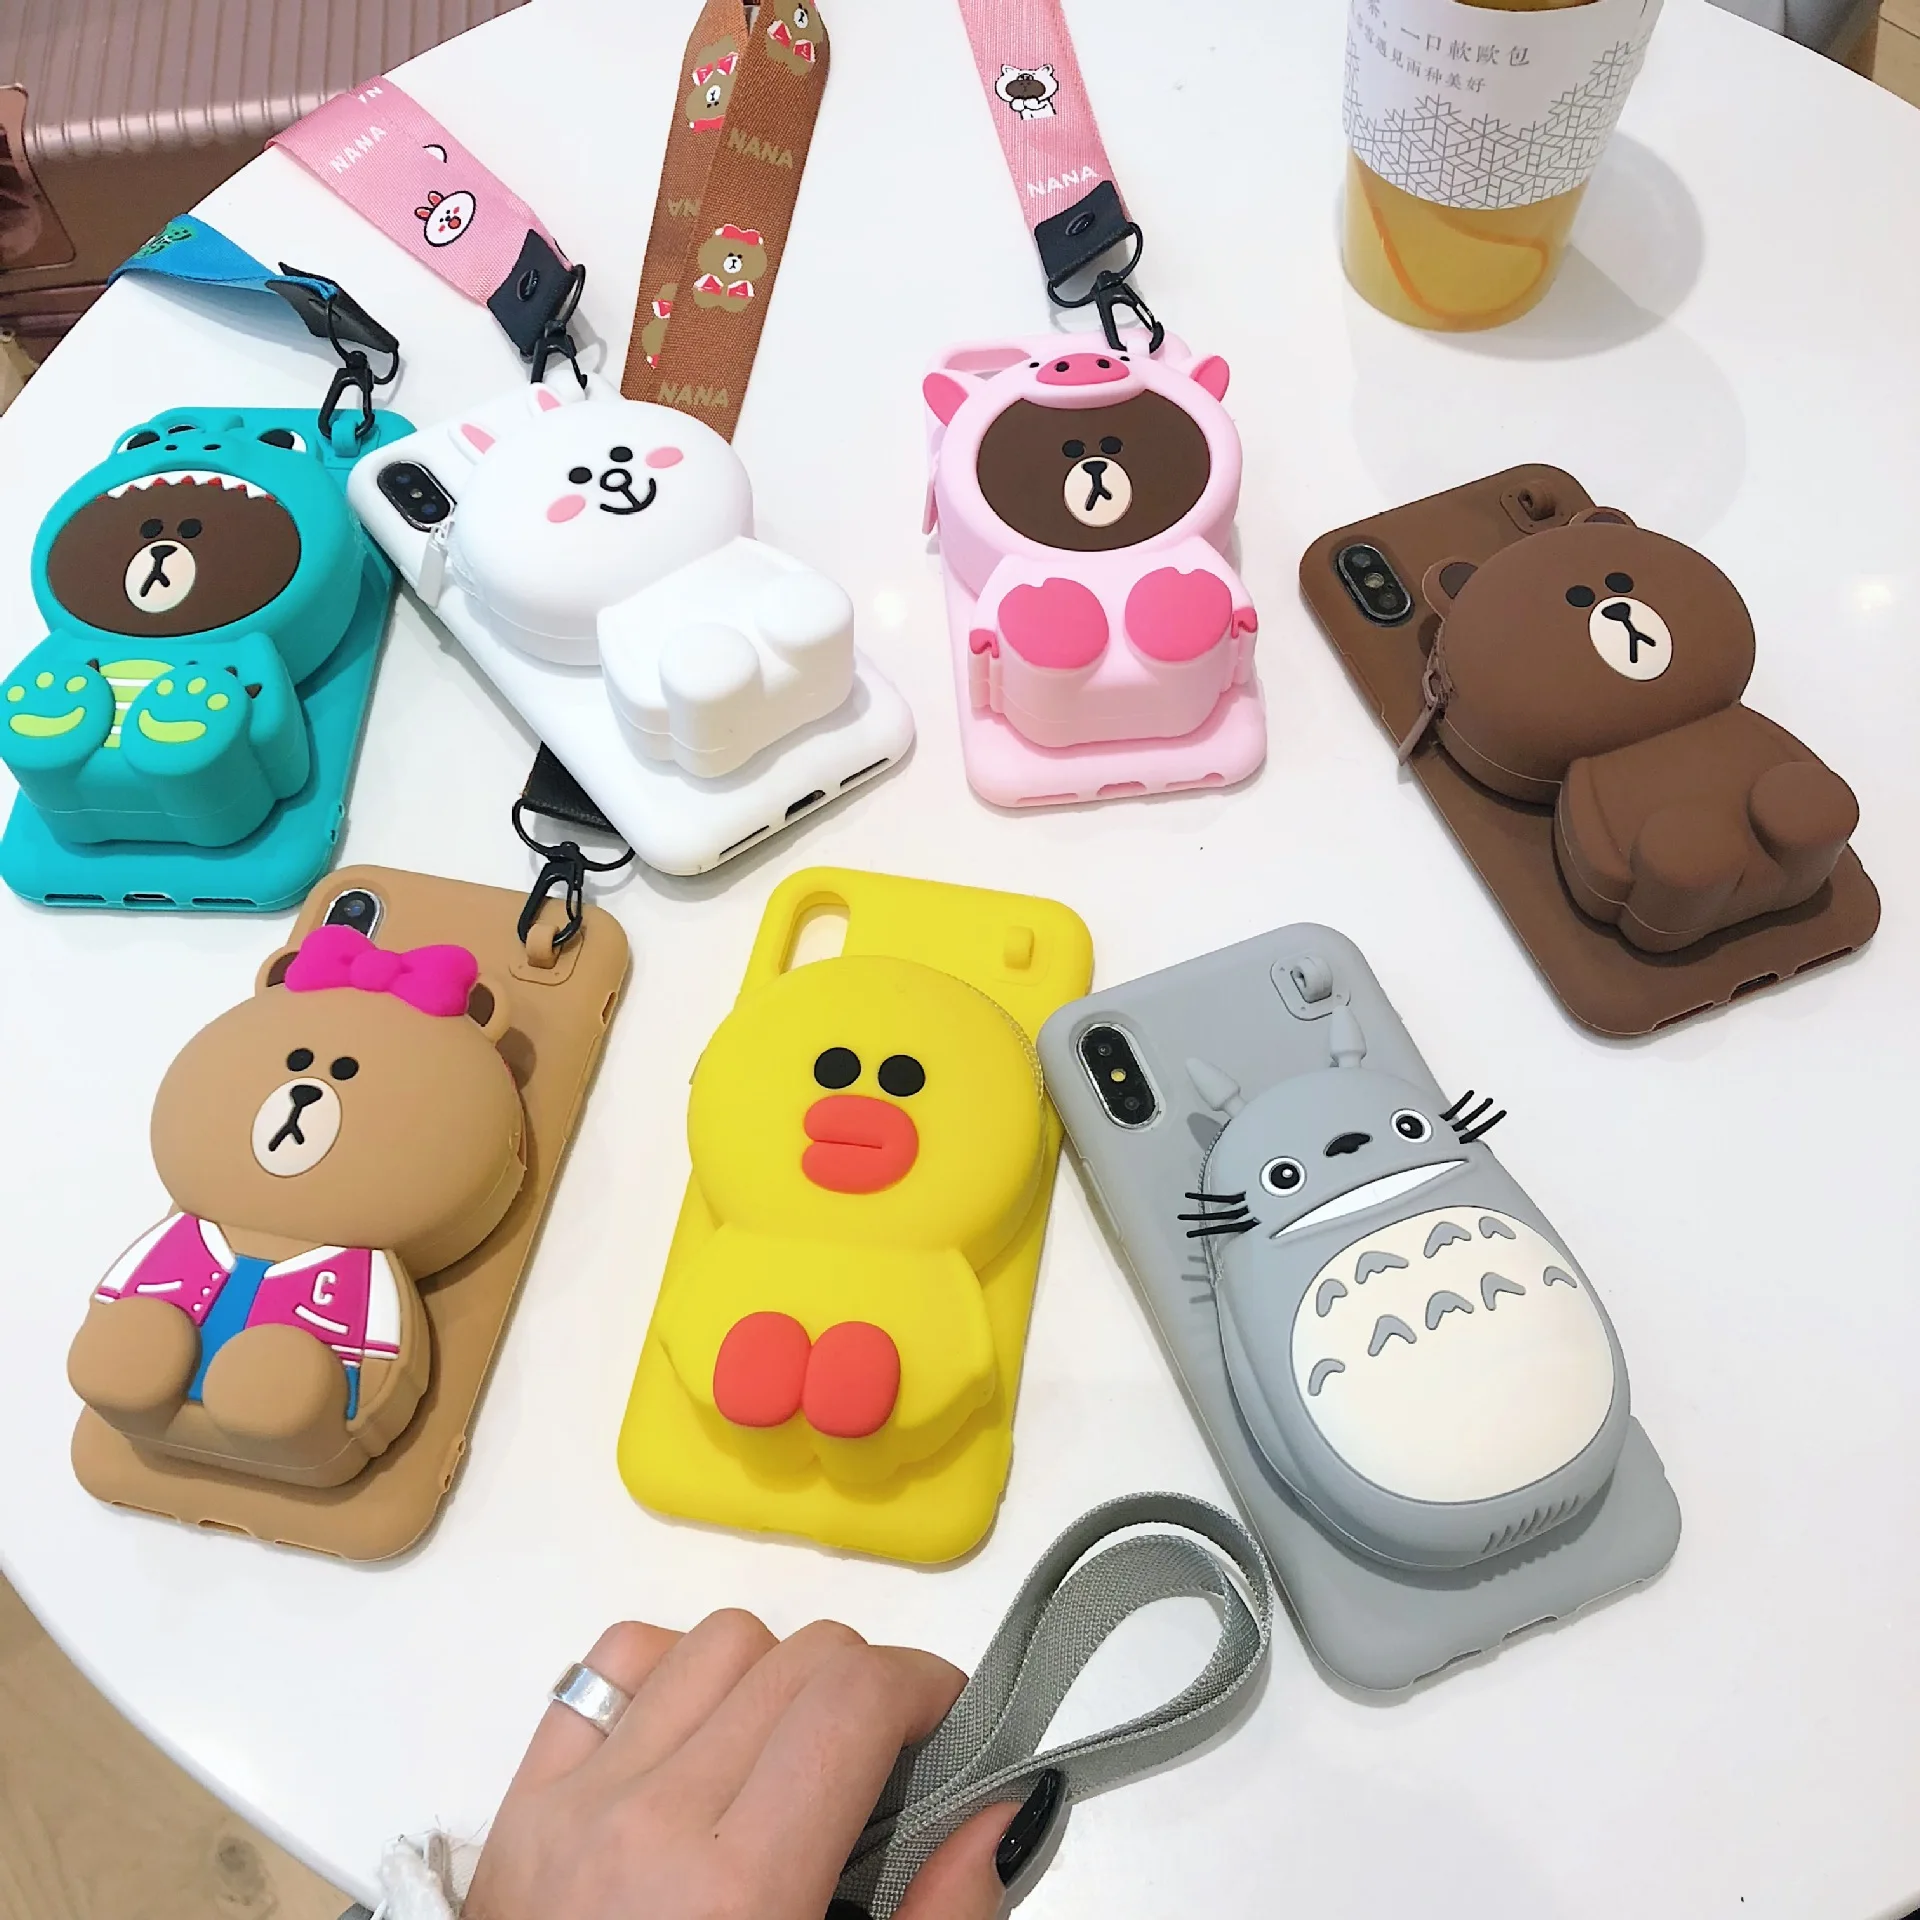 

3D Cartoon Totoro Cony Sally Zipper Wallet Phone Case For Huawei P30 P20 Mate 20 Pro Lite Plus Cute Cartoon Soft Silicone Cover